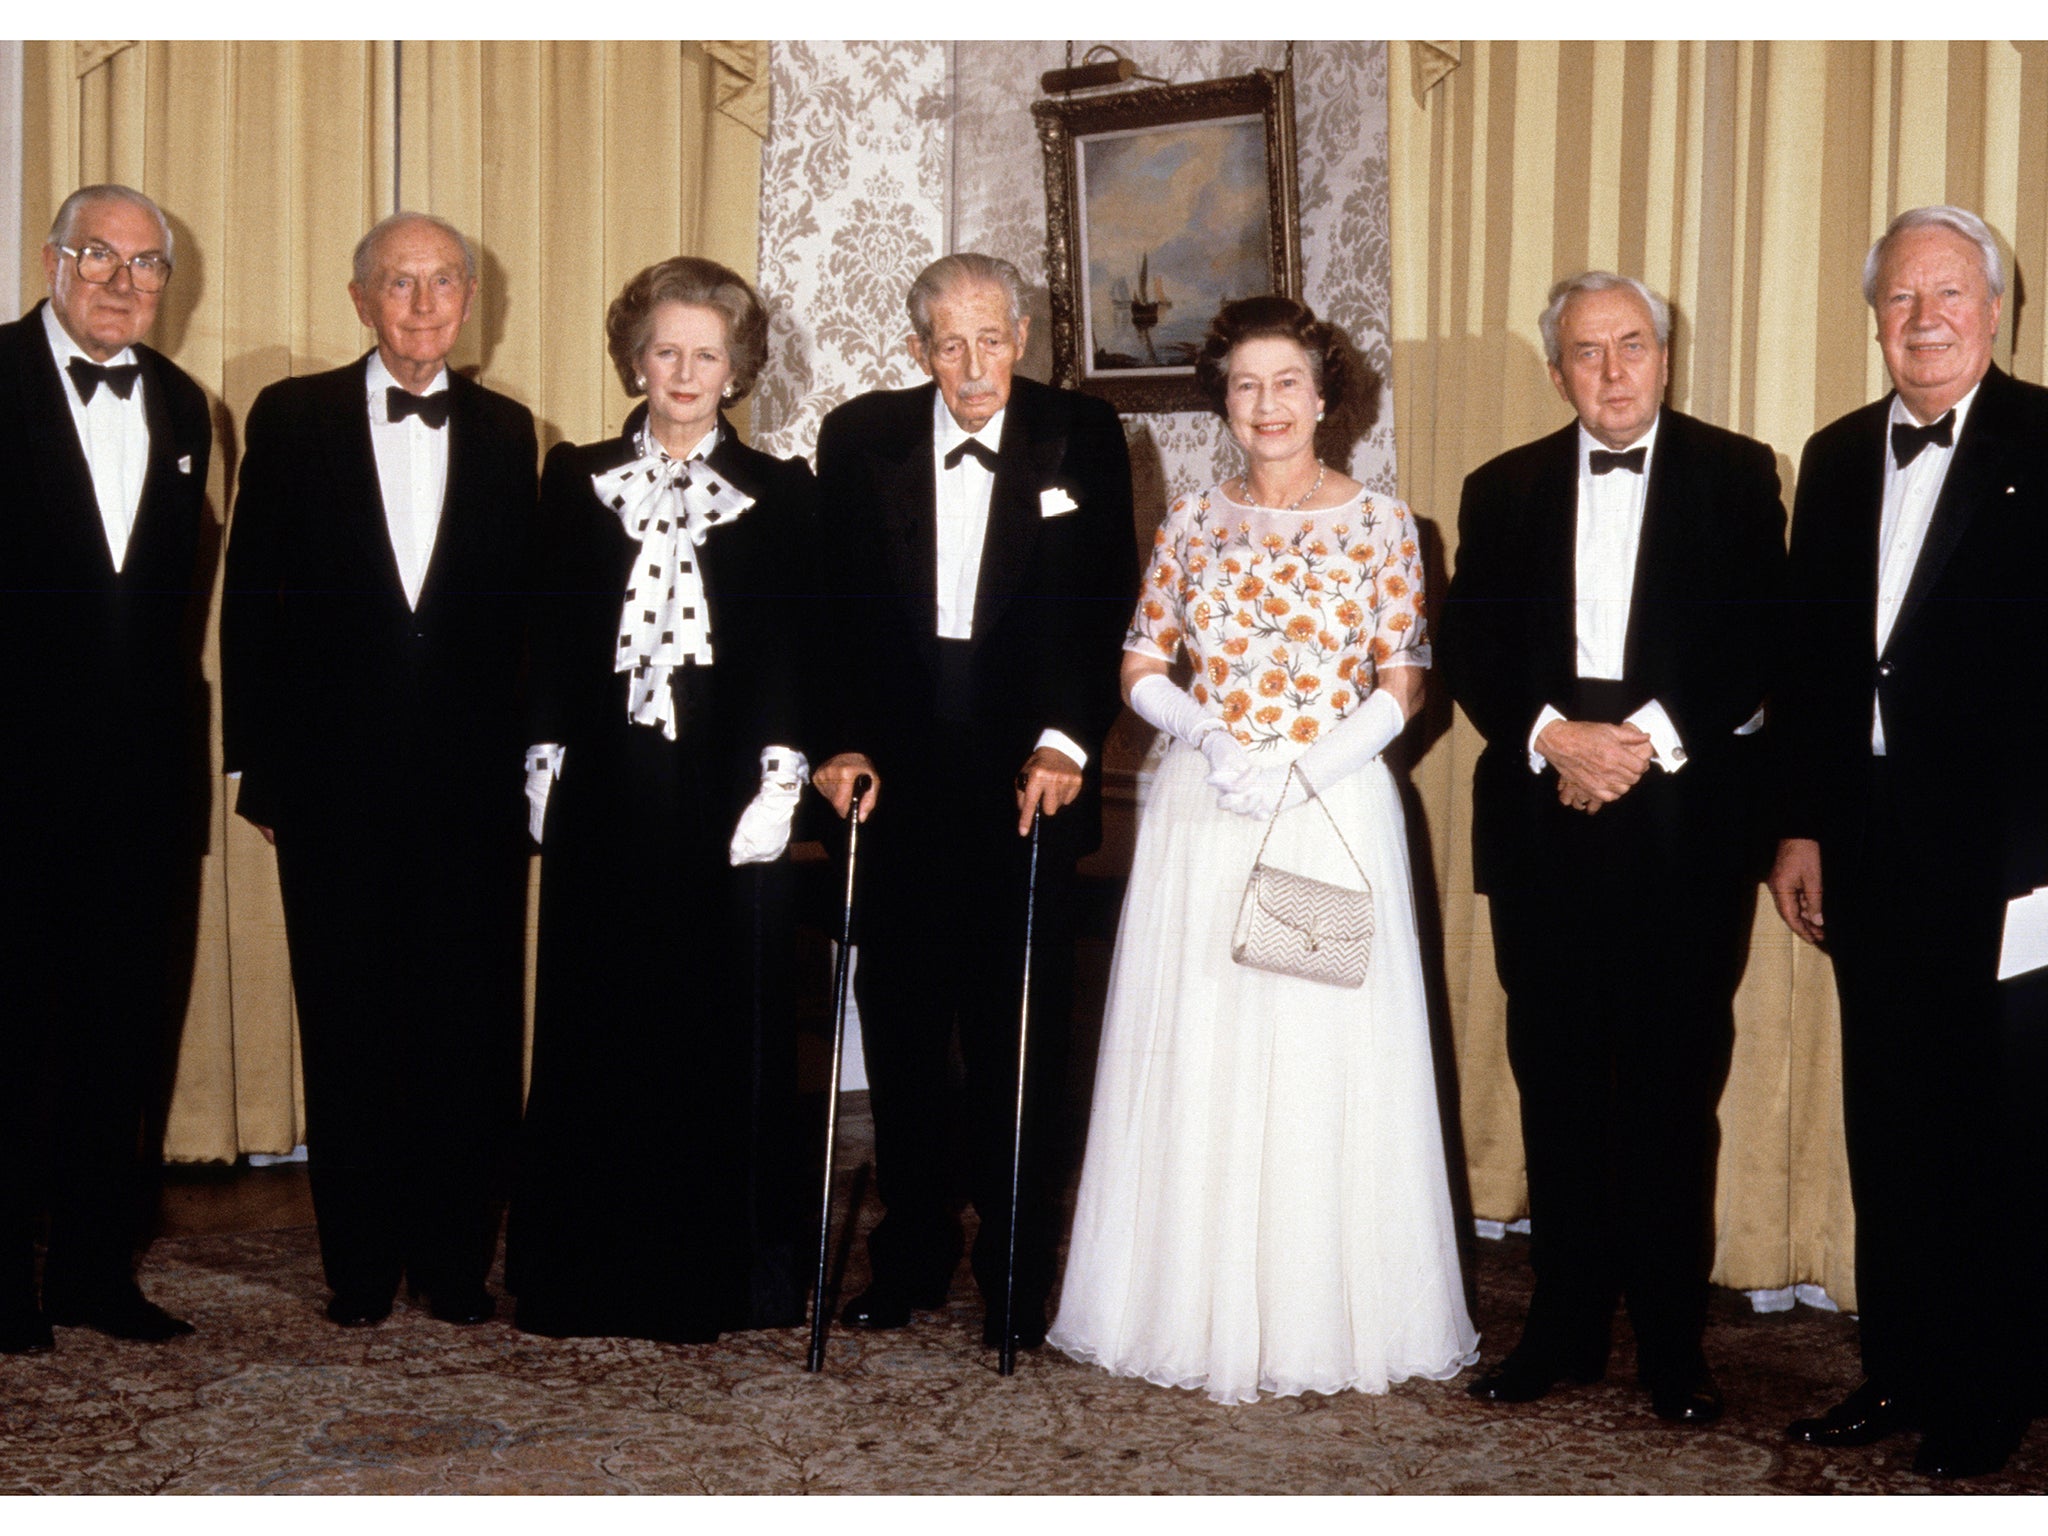 The Queen with six prime ministers, from left to right: Jim Callaghan, Alec Douglas-Home, then-serving Margaret Thatcher, Harold Macmillan, Harold Wilson and Ted Heath